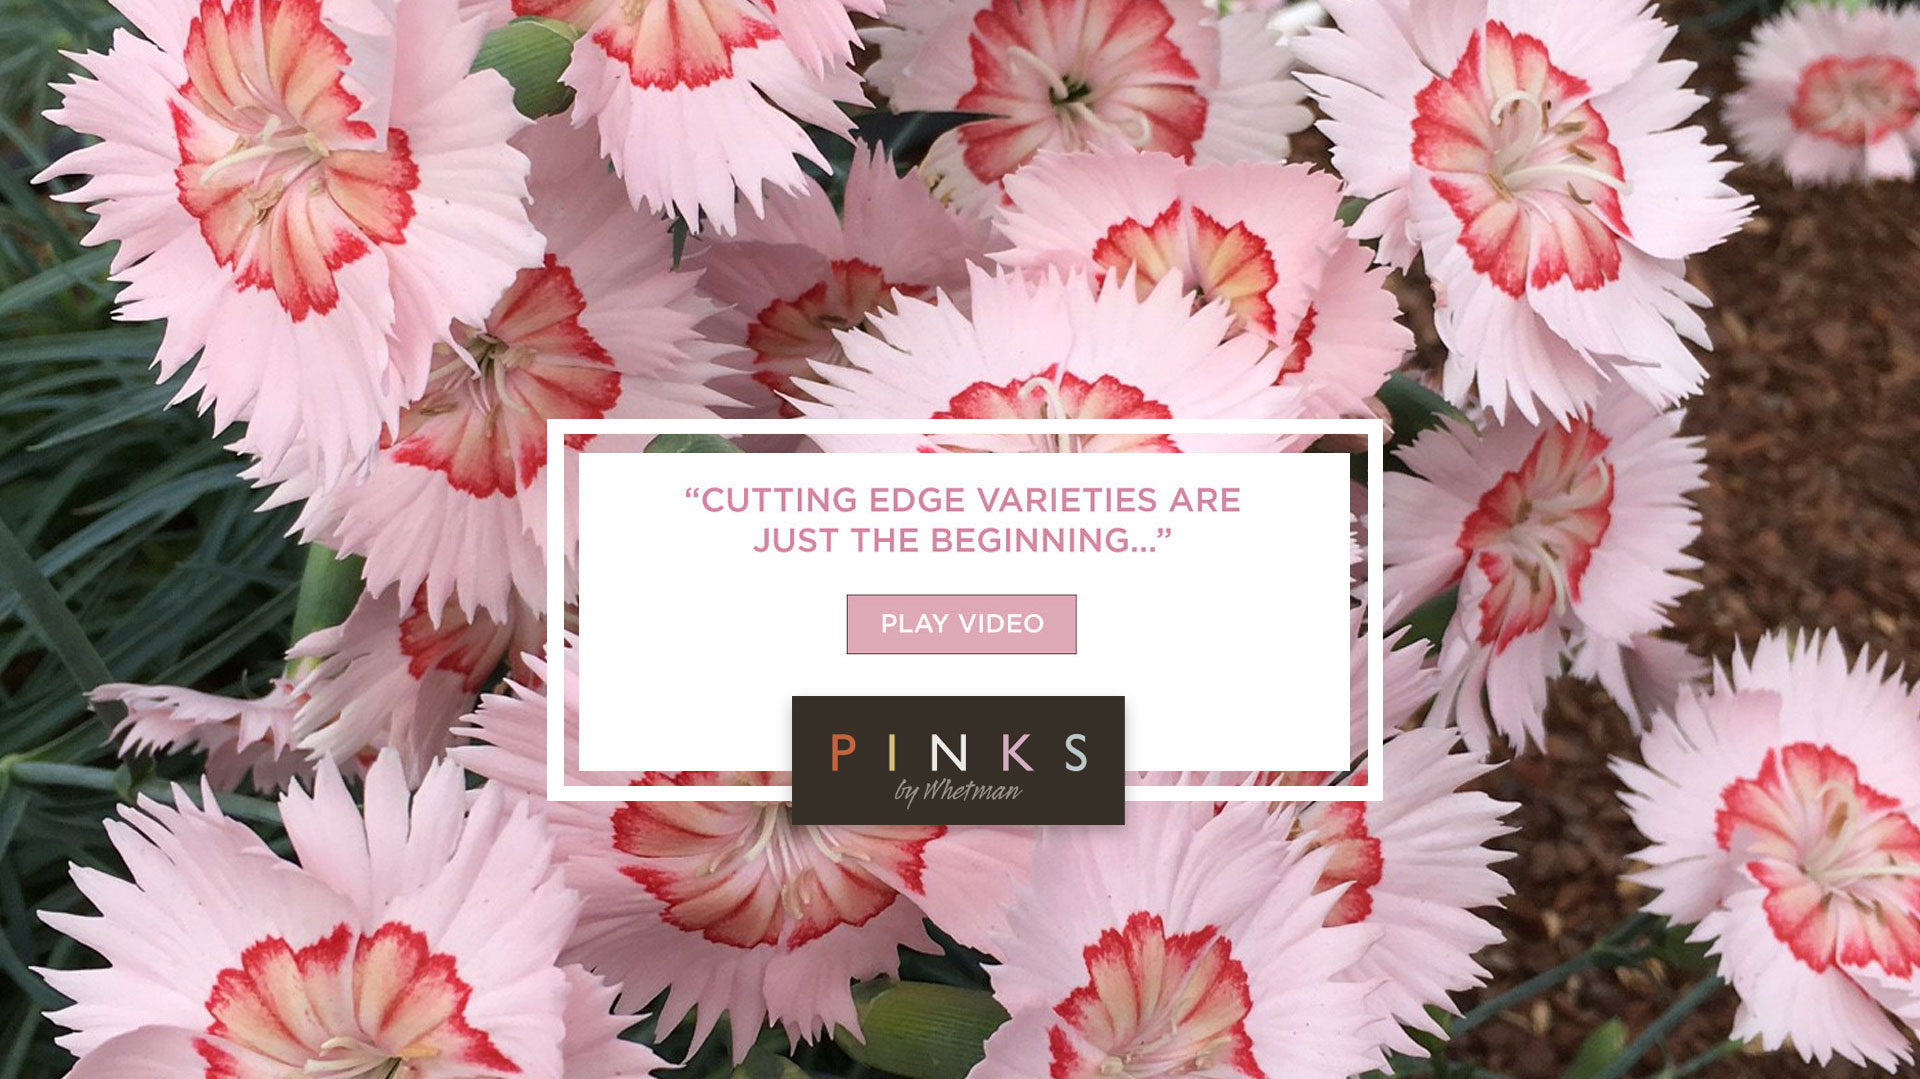 Cutting-edge Dianthus varieties are just the beginning from Whetman Pinks USA